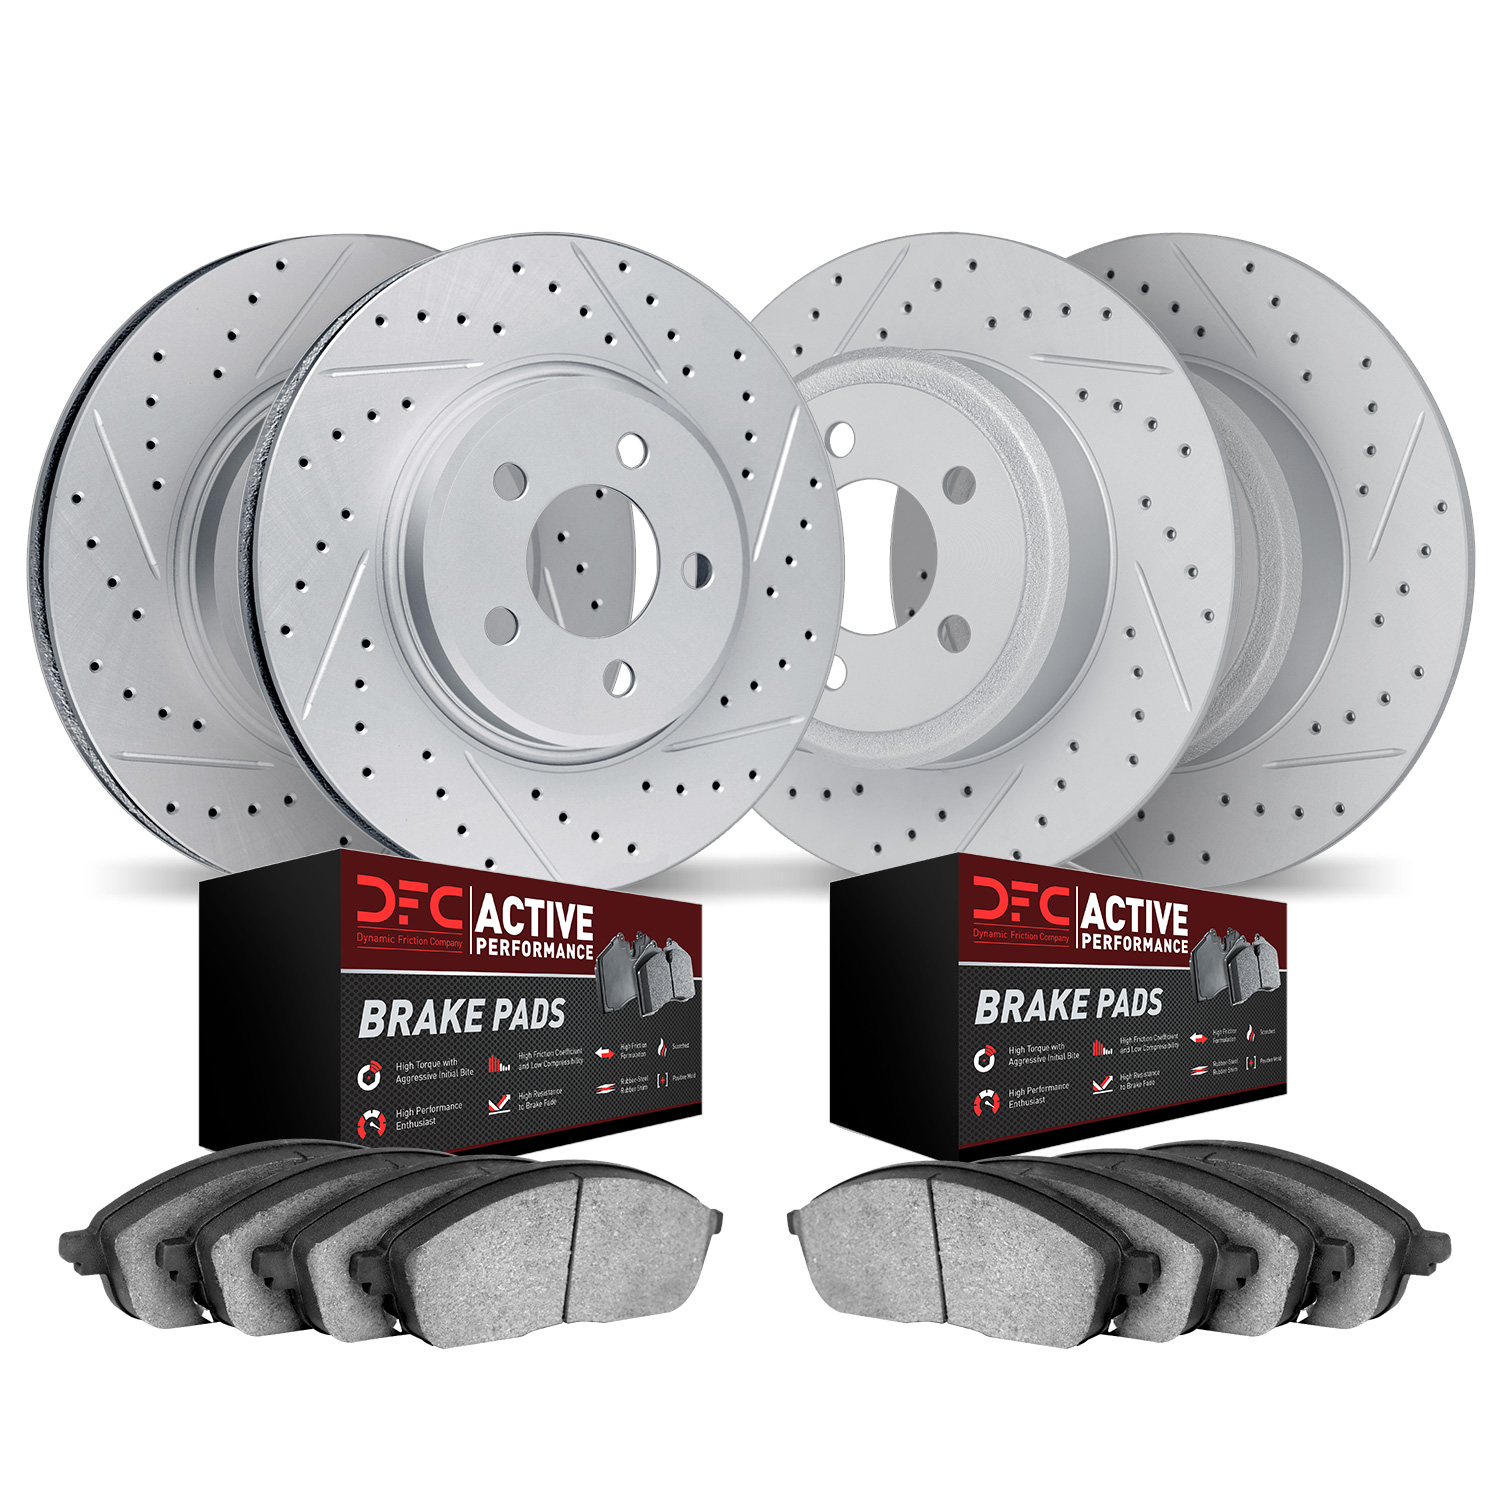 2704-13026 Geoperformance Drilled/Slotted Brake Rotors with Active Performance Pads Kit, 2000-2002 Subaru, Position: Front and R